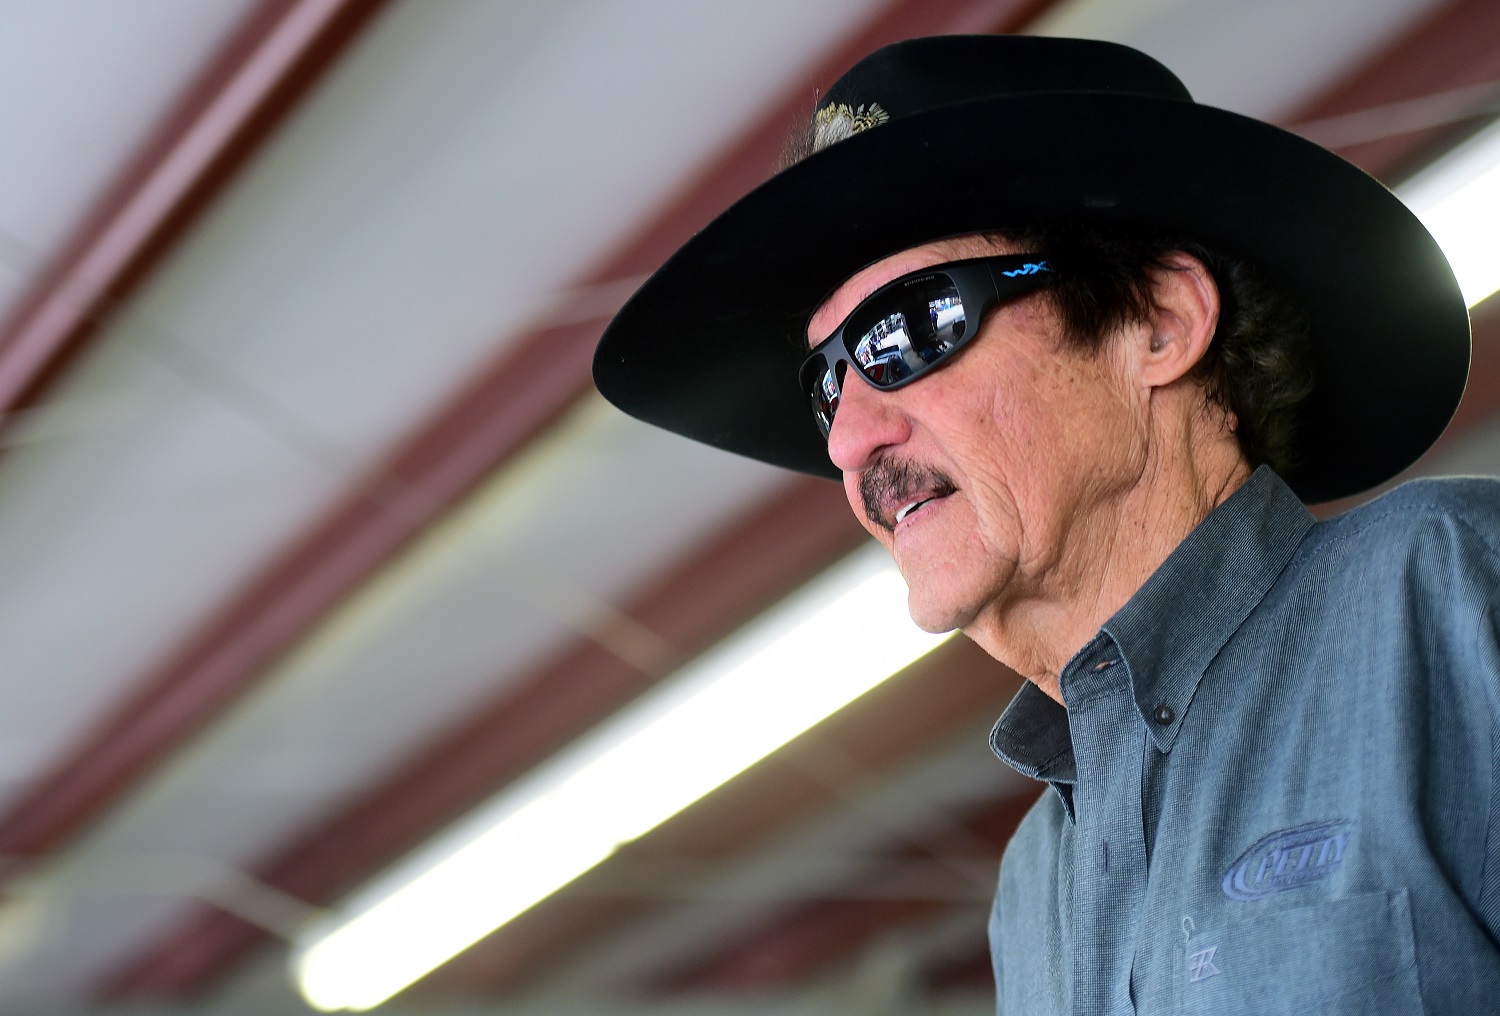 NASCAR Hall of Famer Richard Petty stands in the garage area during practice for the Monster Energy NASCAR Cup Series Foxwoods Resort Casino 301 at New Hampshire Motor Speedway on July 20, 2019.